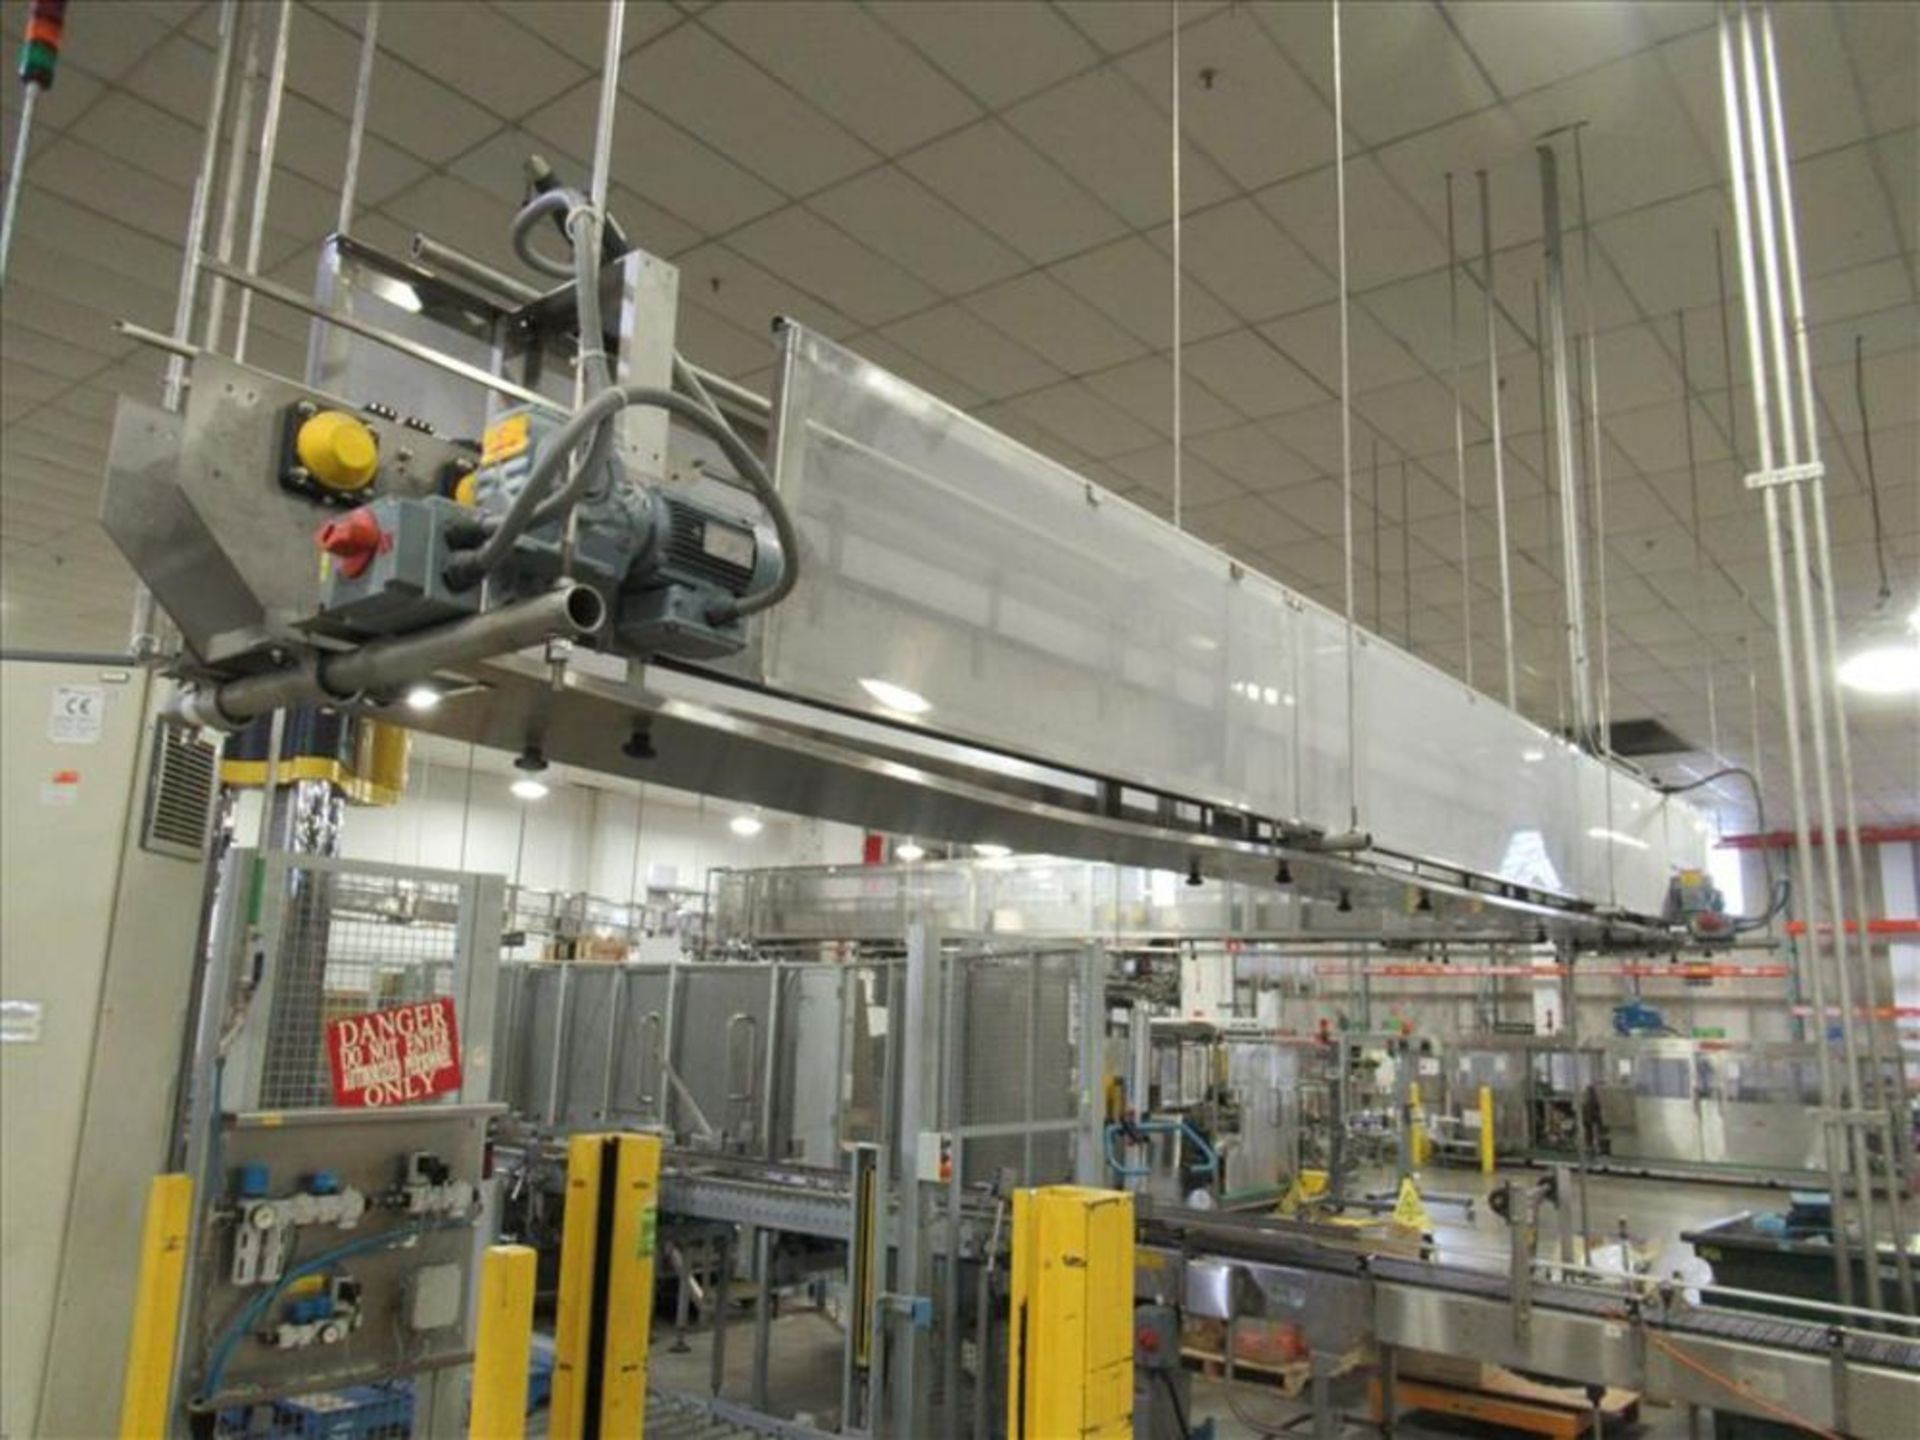 Overhead case conveyor approx 120 to 150 ft. long, extending to palletizing stations, stainless - Image 4 of 4